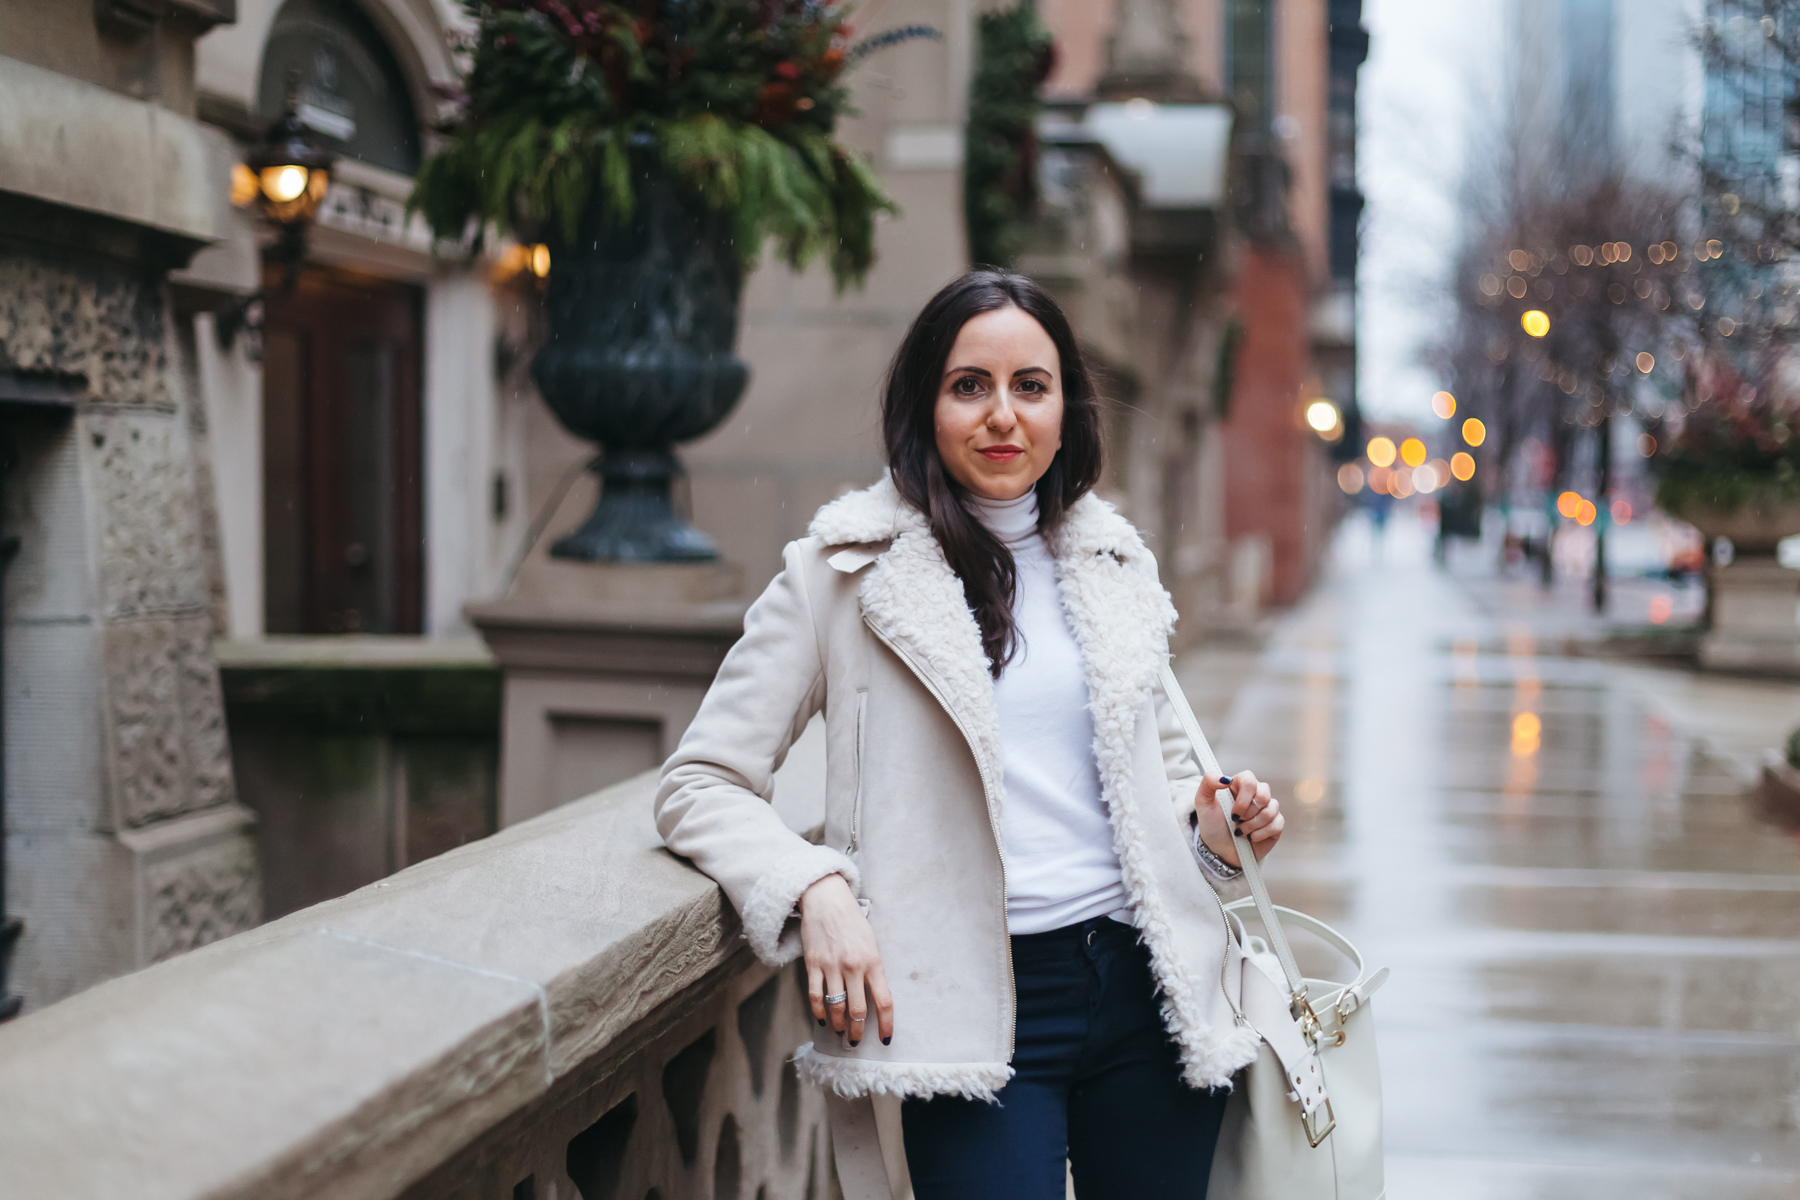 Yana Frigelis of NoMad Luxuries wearing a shearling jacket from zara and studded boots from topshop for winter style in chicago